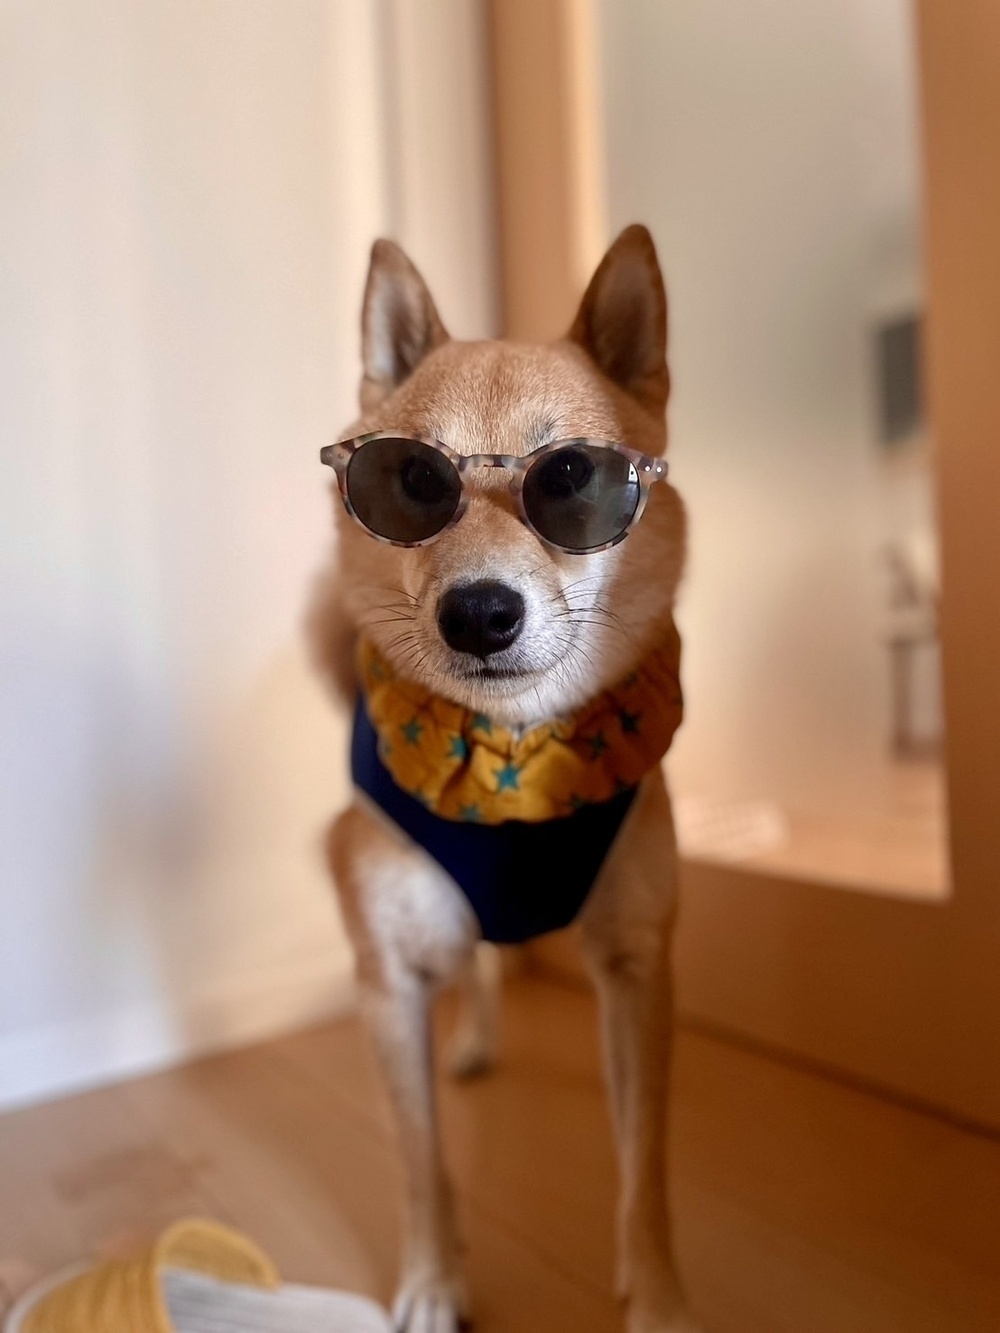 A dog wearing sunglasses and a colorful scarf stands indoors near a door.